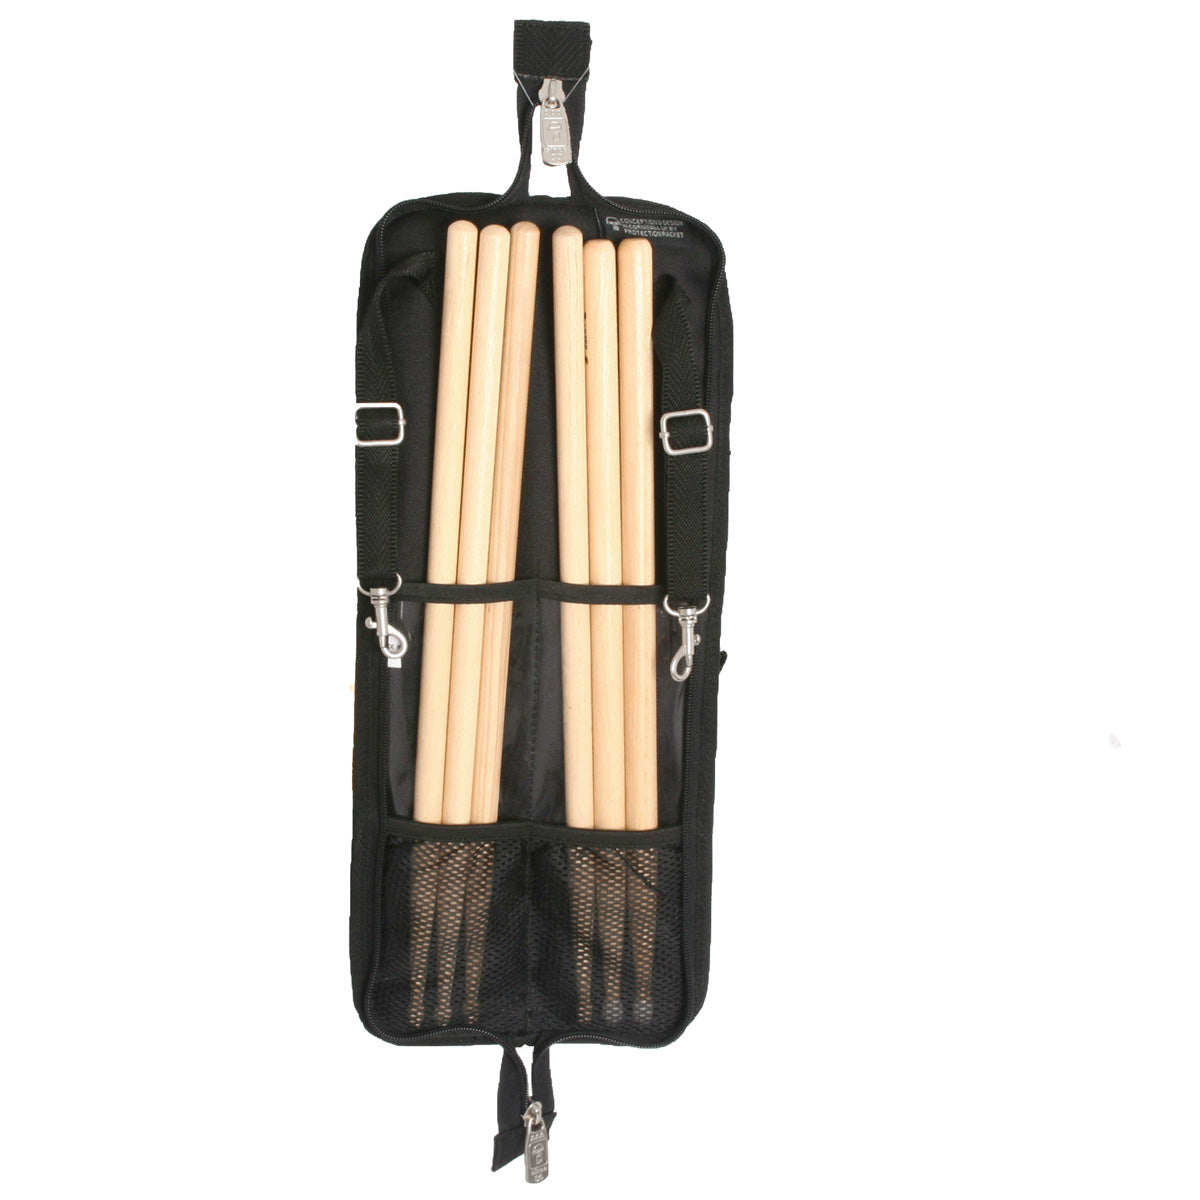 Protection Racket Standard Stick Bag - 3 Pairs